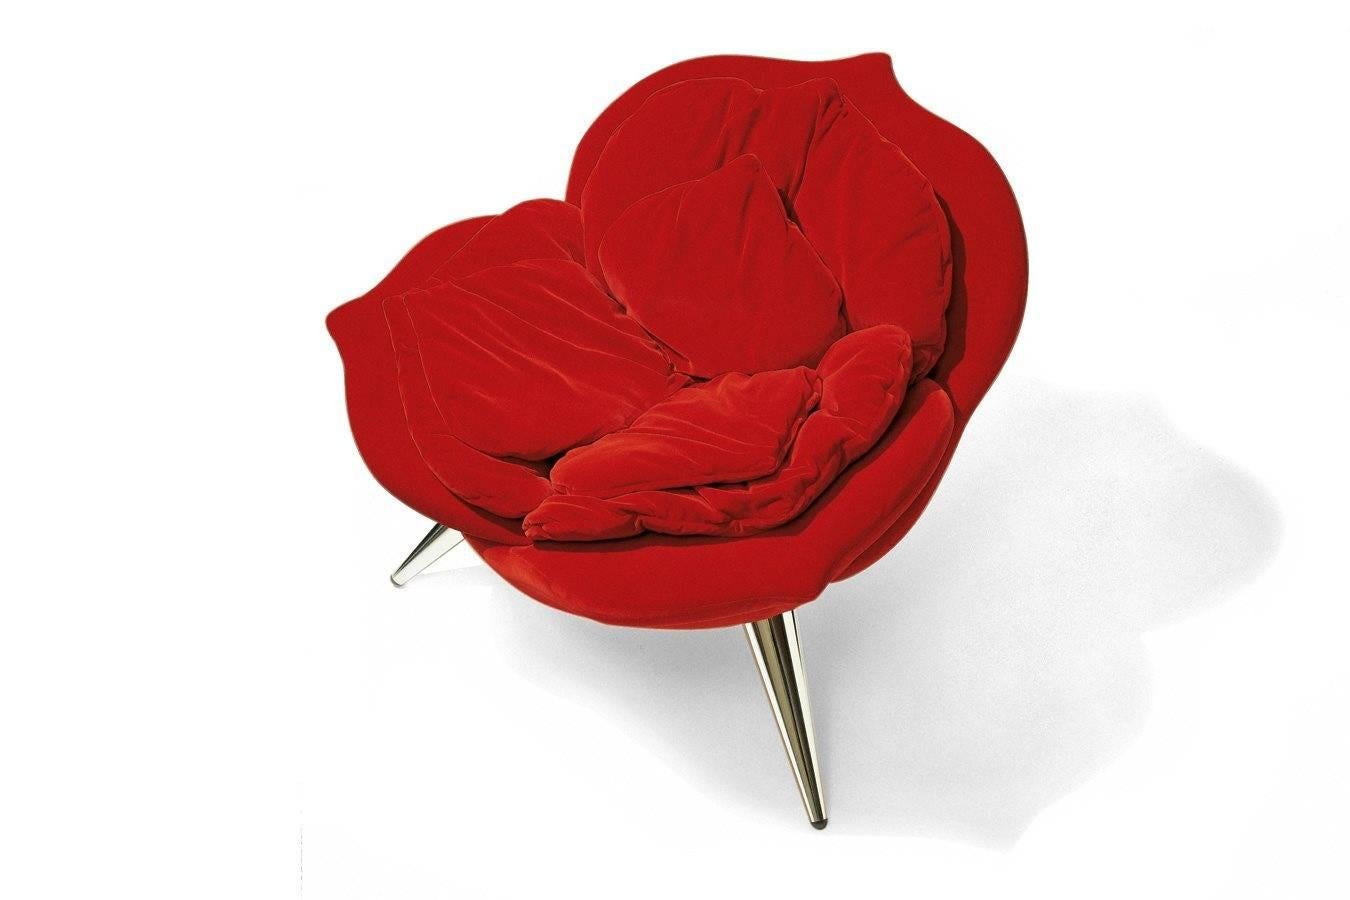 The “petals” are individually padded by hand to make the chair cozy and welcoming. The velvet cover suggests the tactile sensation of rose petals.

A chair in the form of a rose, precious like a haute couture creation.

The Rose chair is